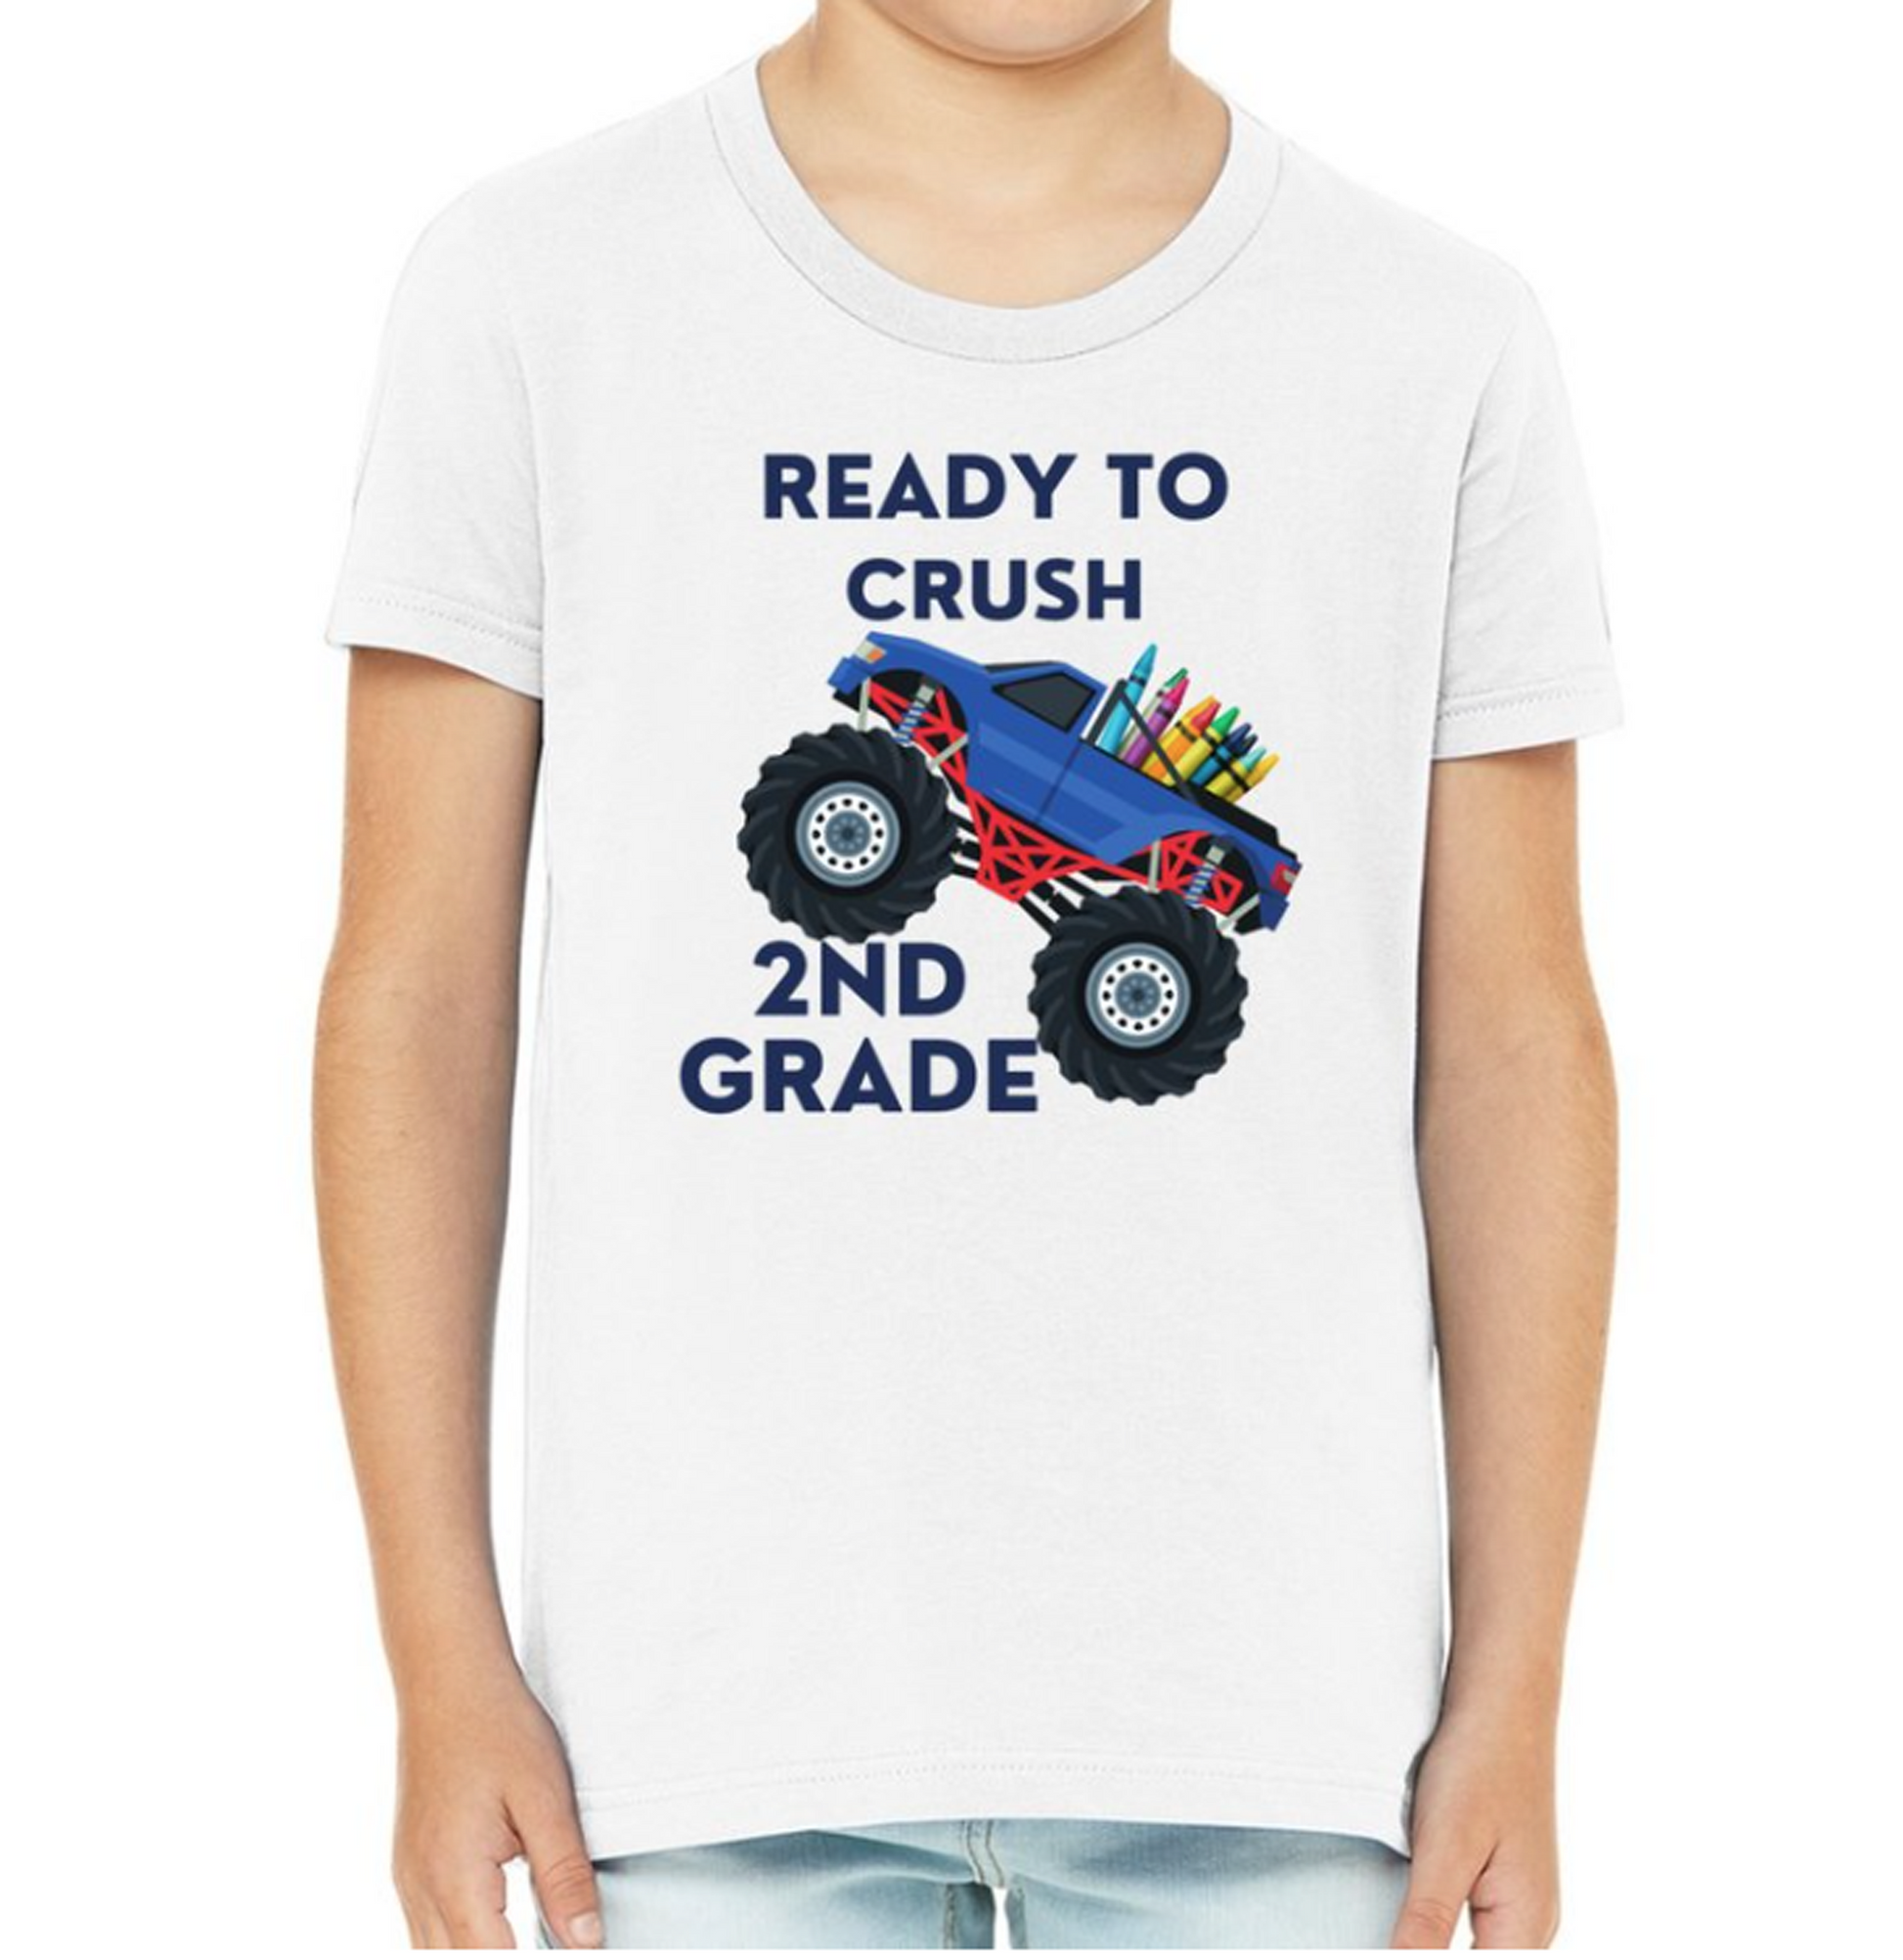 Ready to Crush 2nd Grade Youth Jersey Unisex Tee 